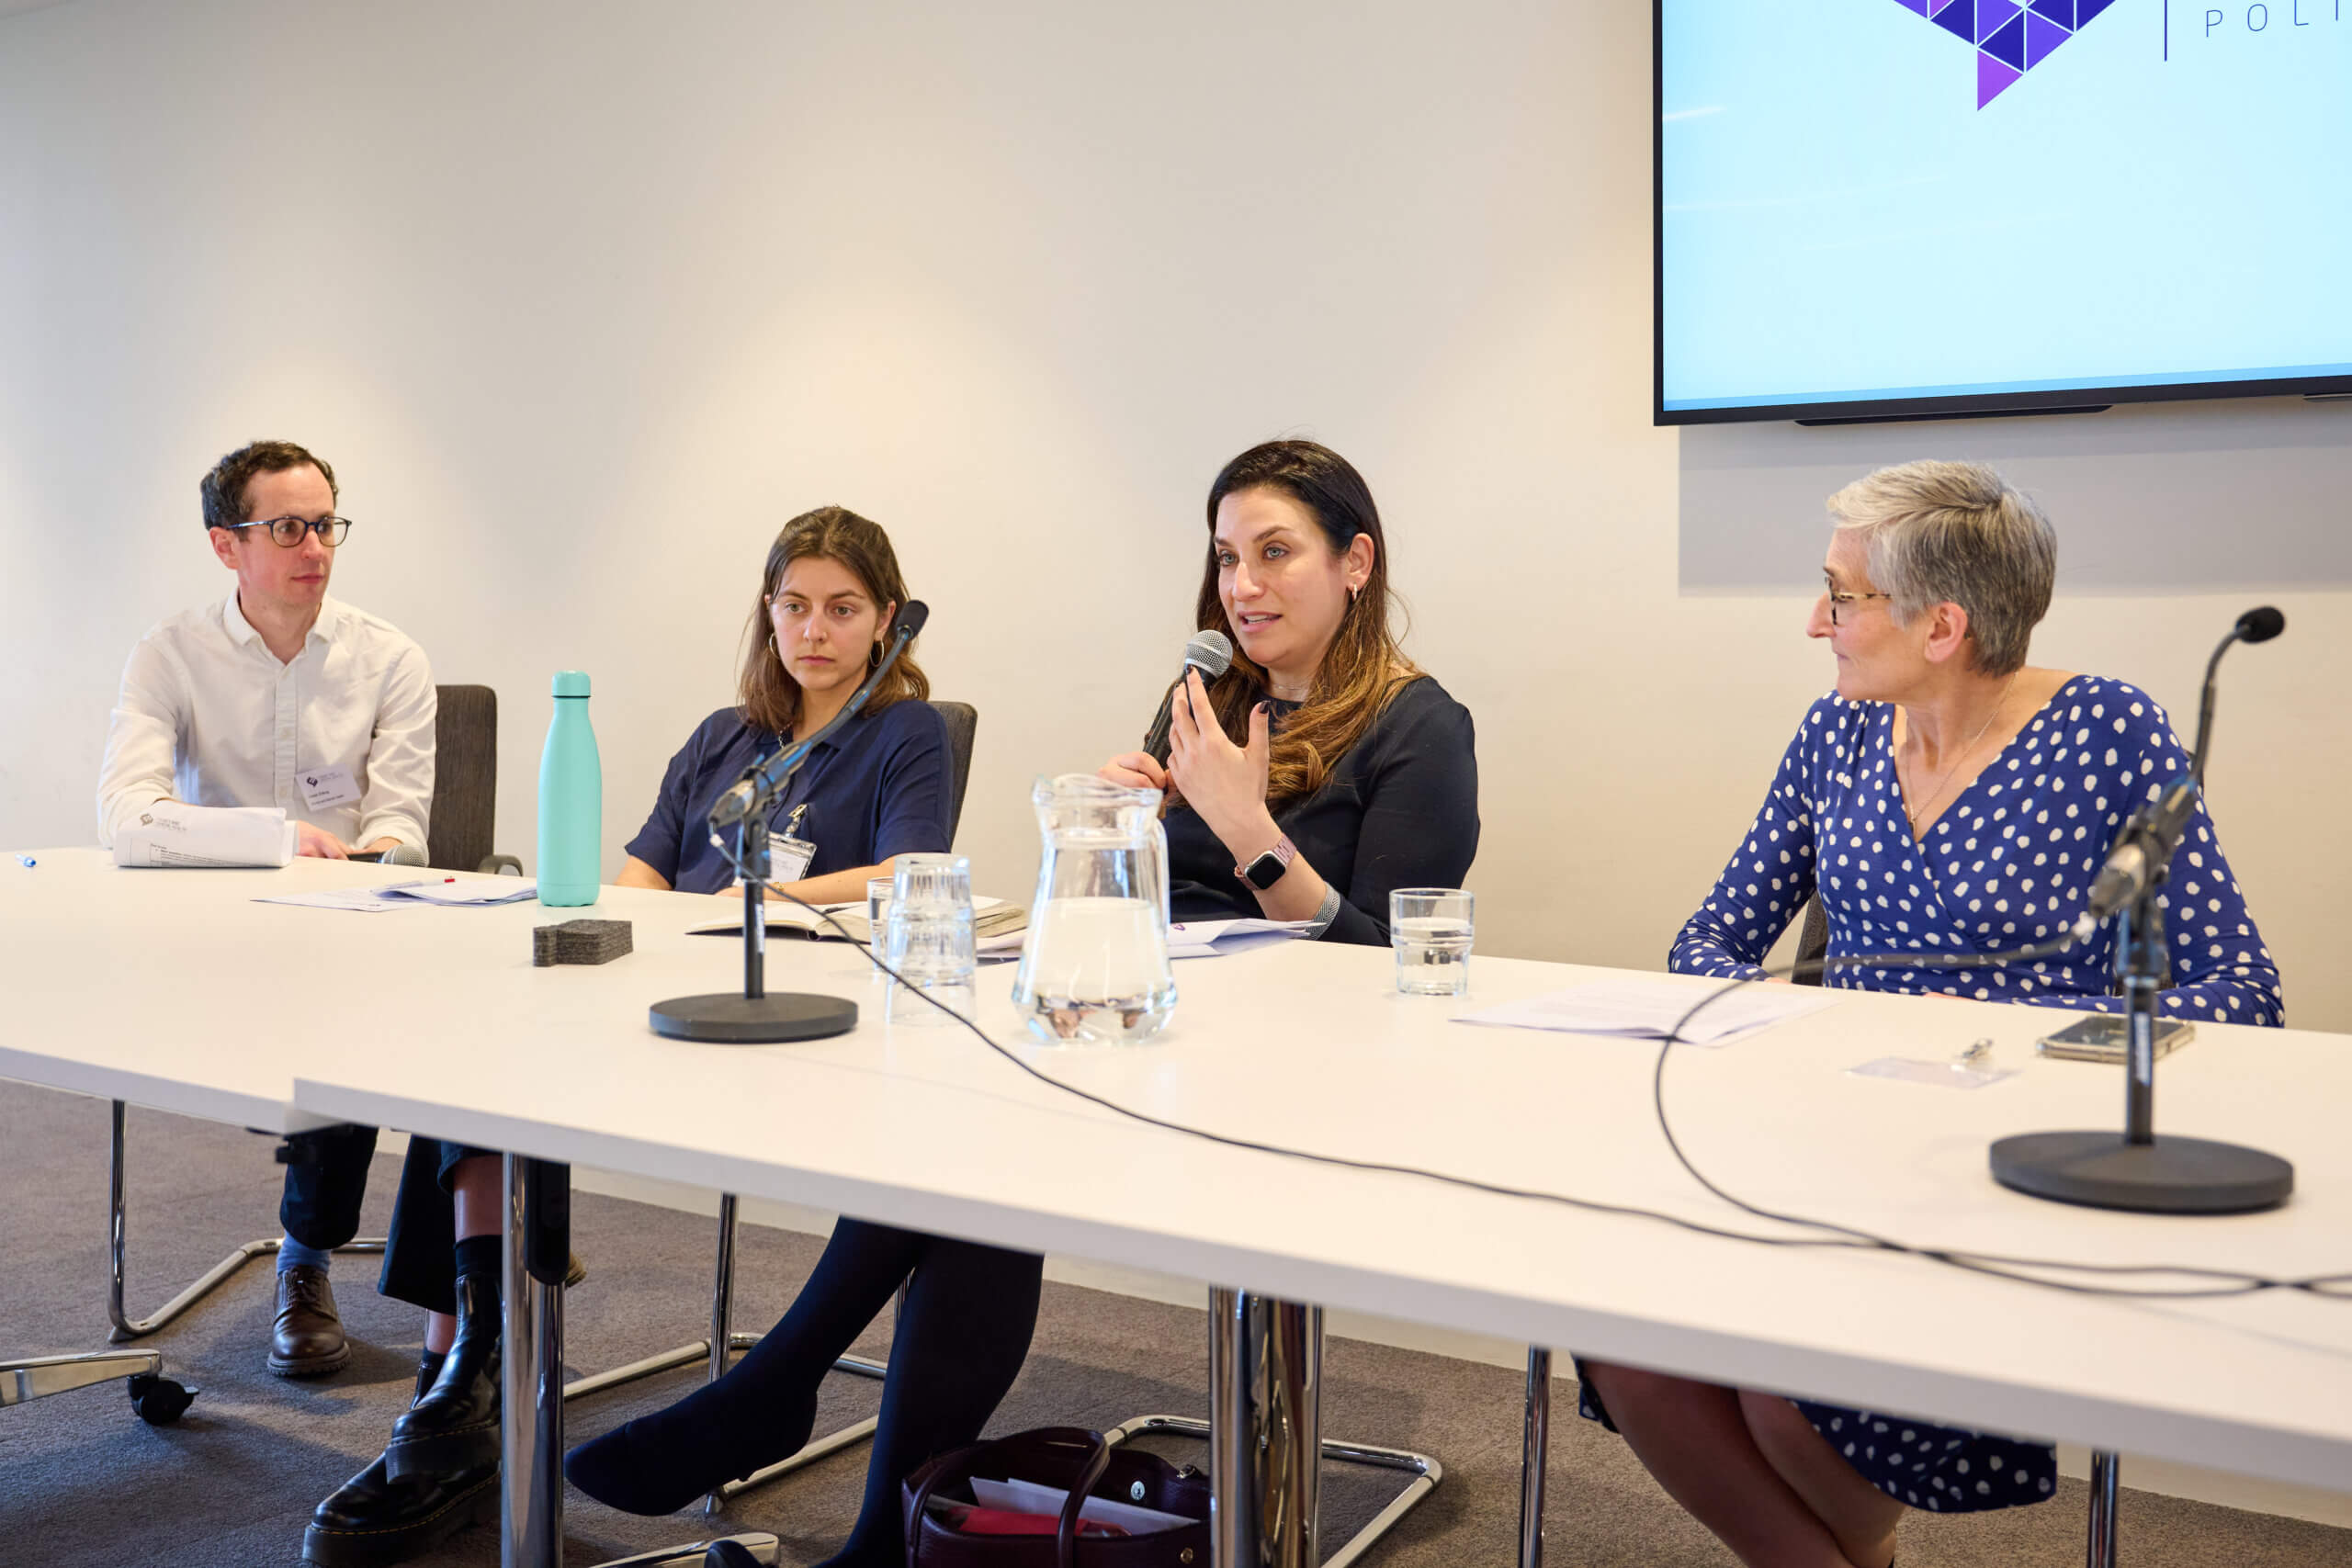 Conor D'Arcy, Becca Stacey, Luciana Berger and Clare Moriarty on the panel at Money and Mental Health's launch event for Always on your mind.